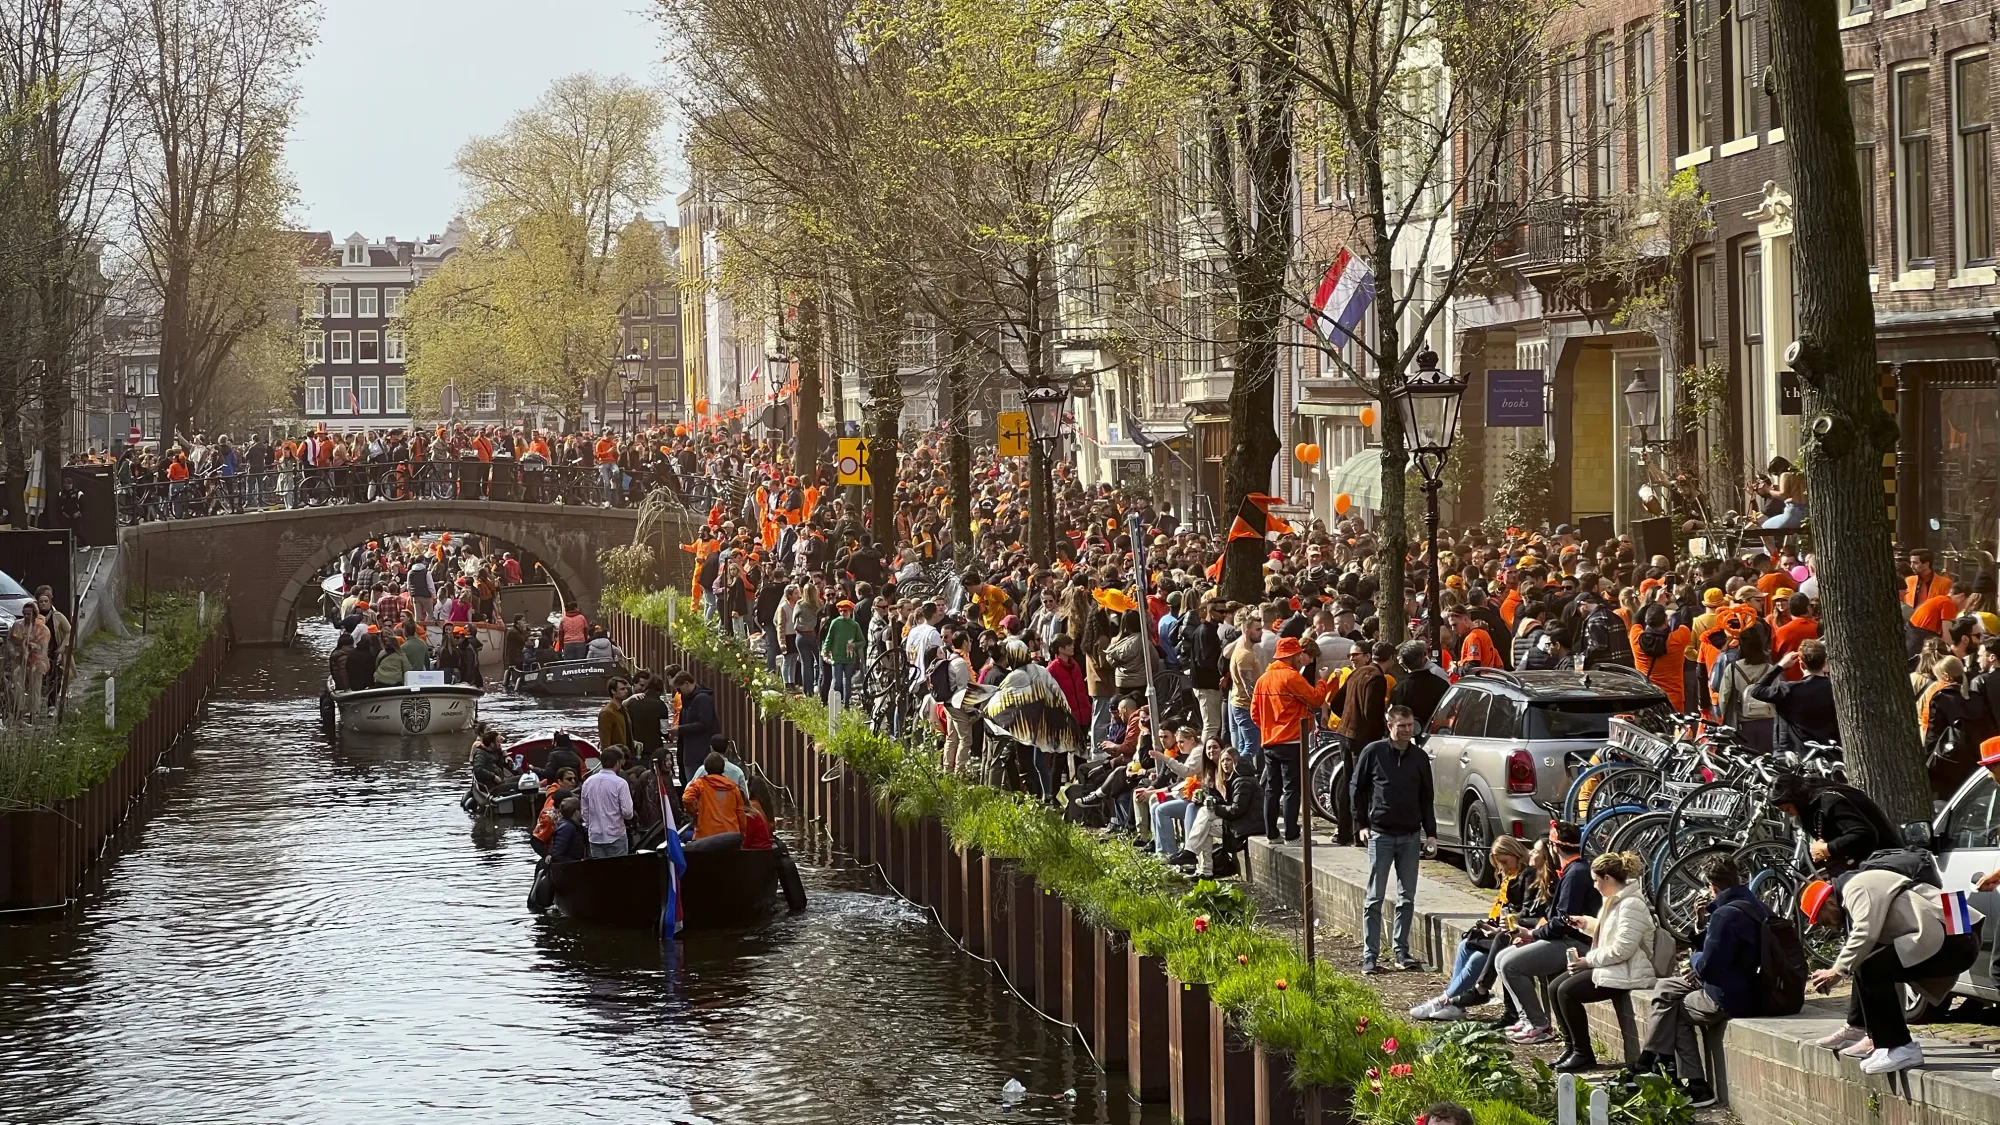 Masses of people dressed in orange celebrating King's Day along the canal